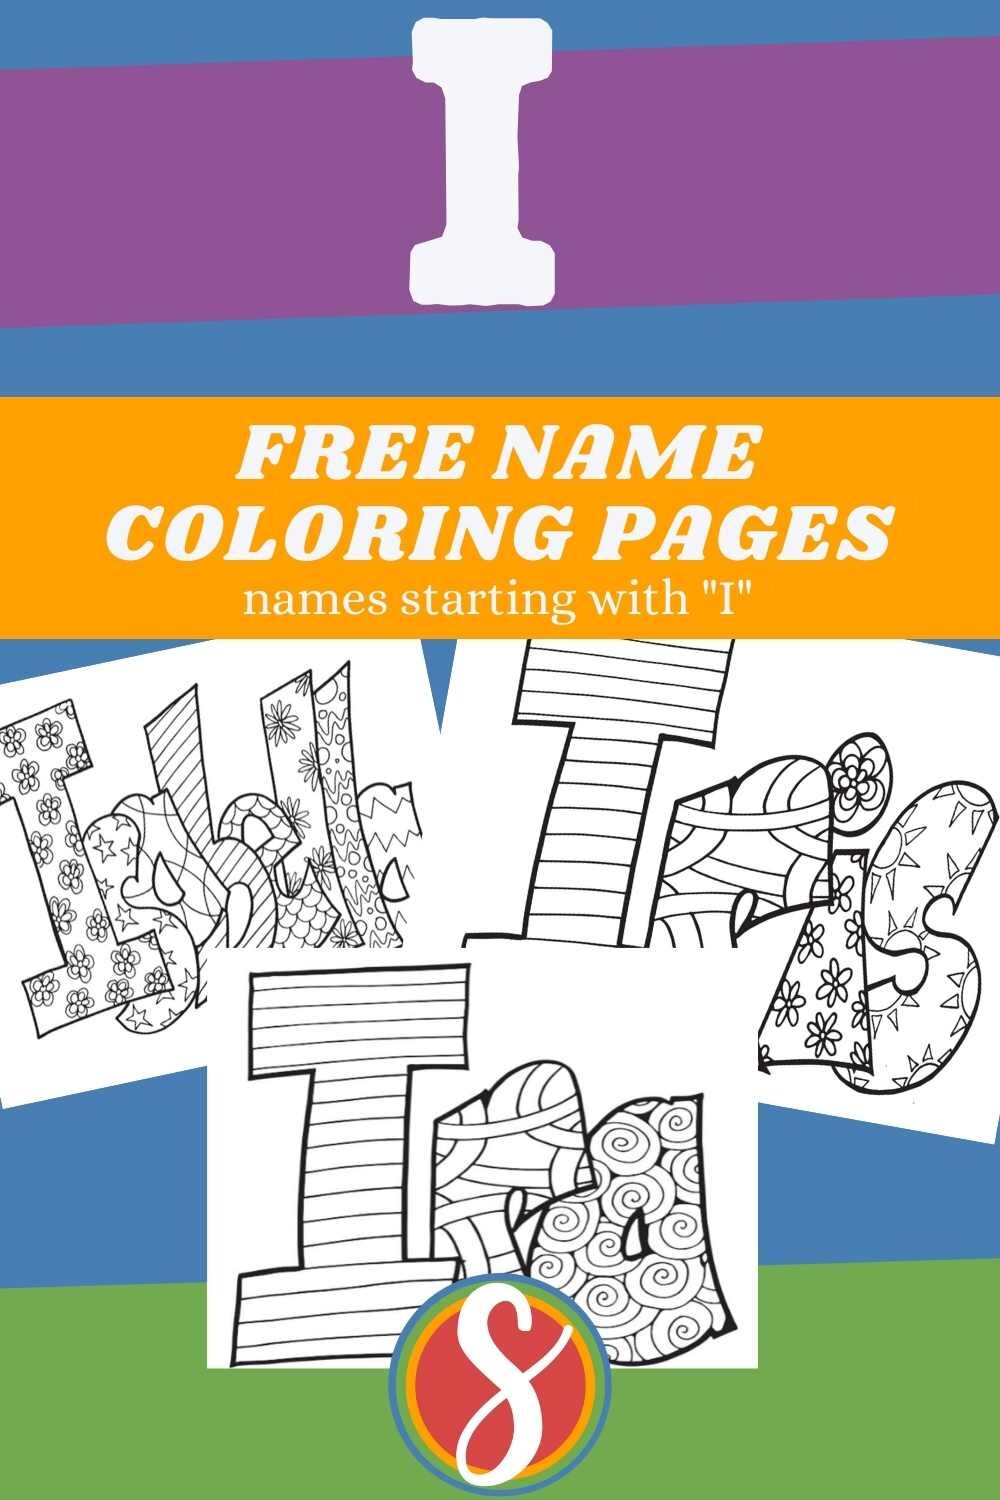 free name coloring page starts with i.jpg